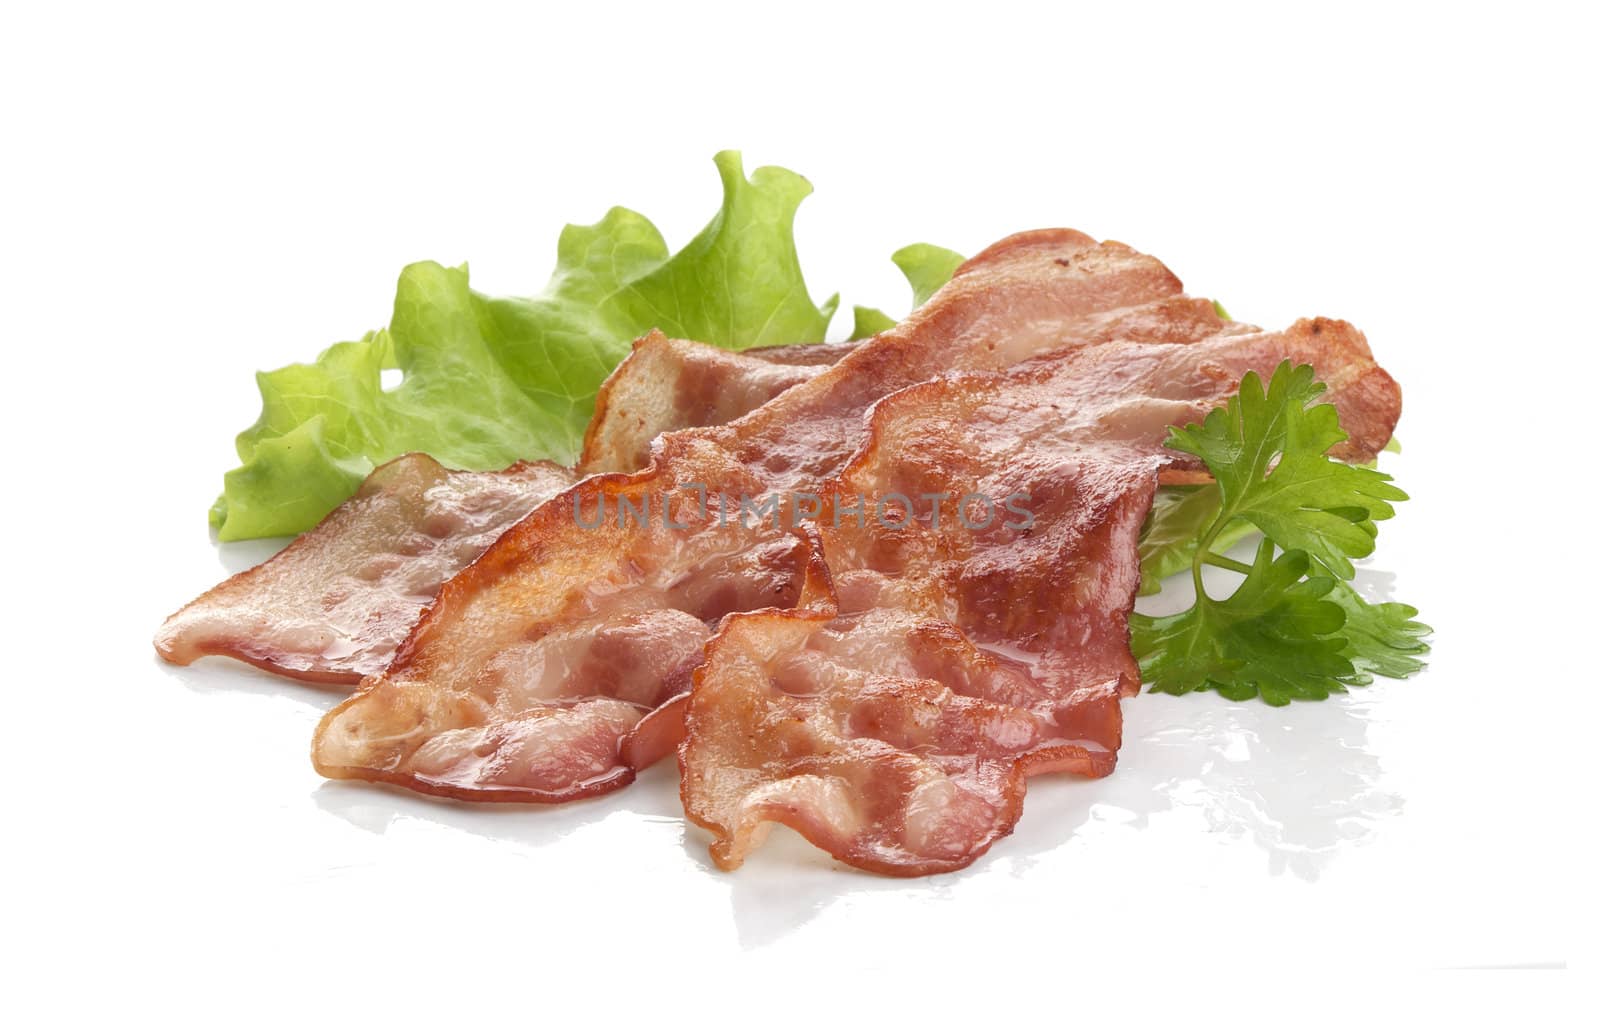 Fried bacon by Angorius